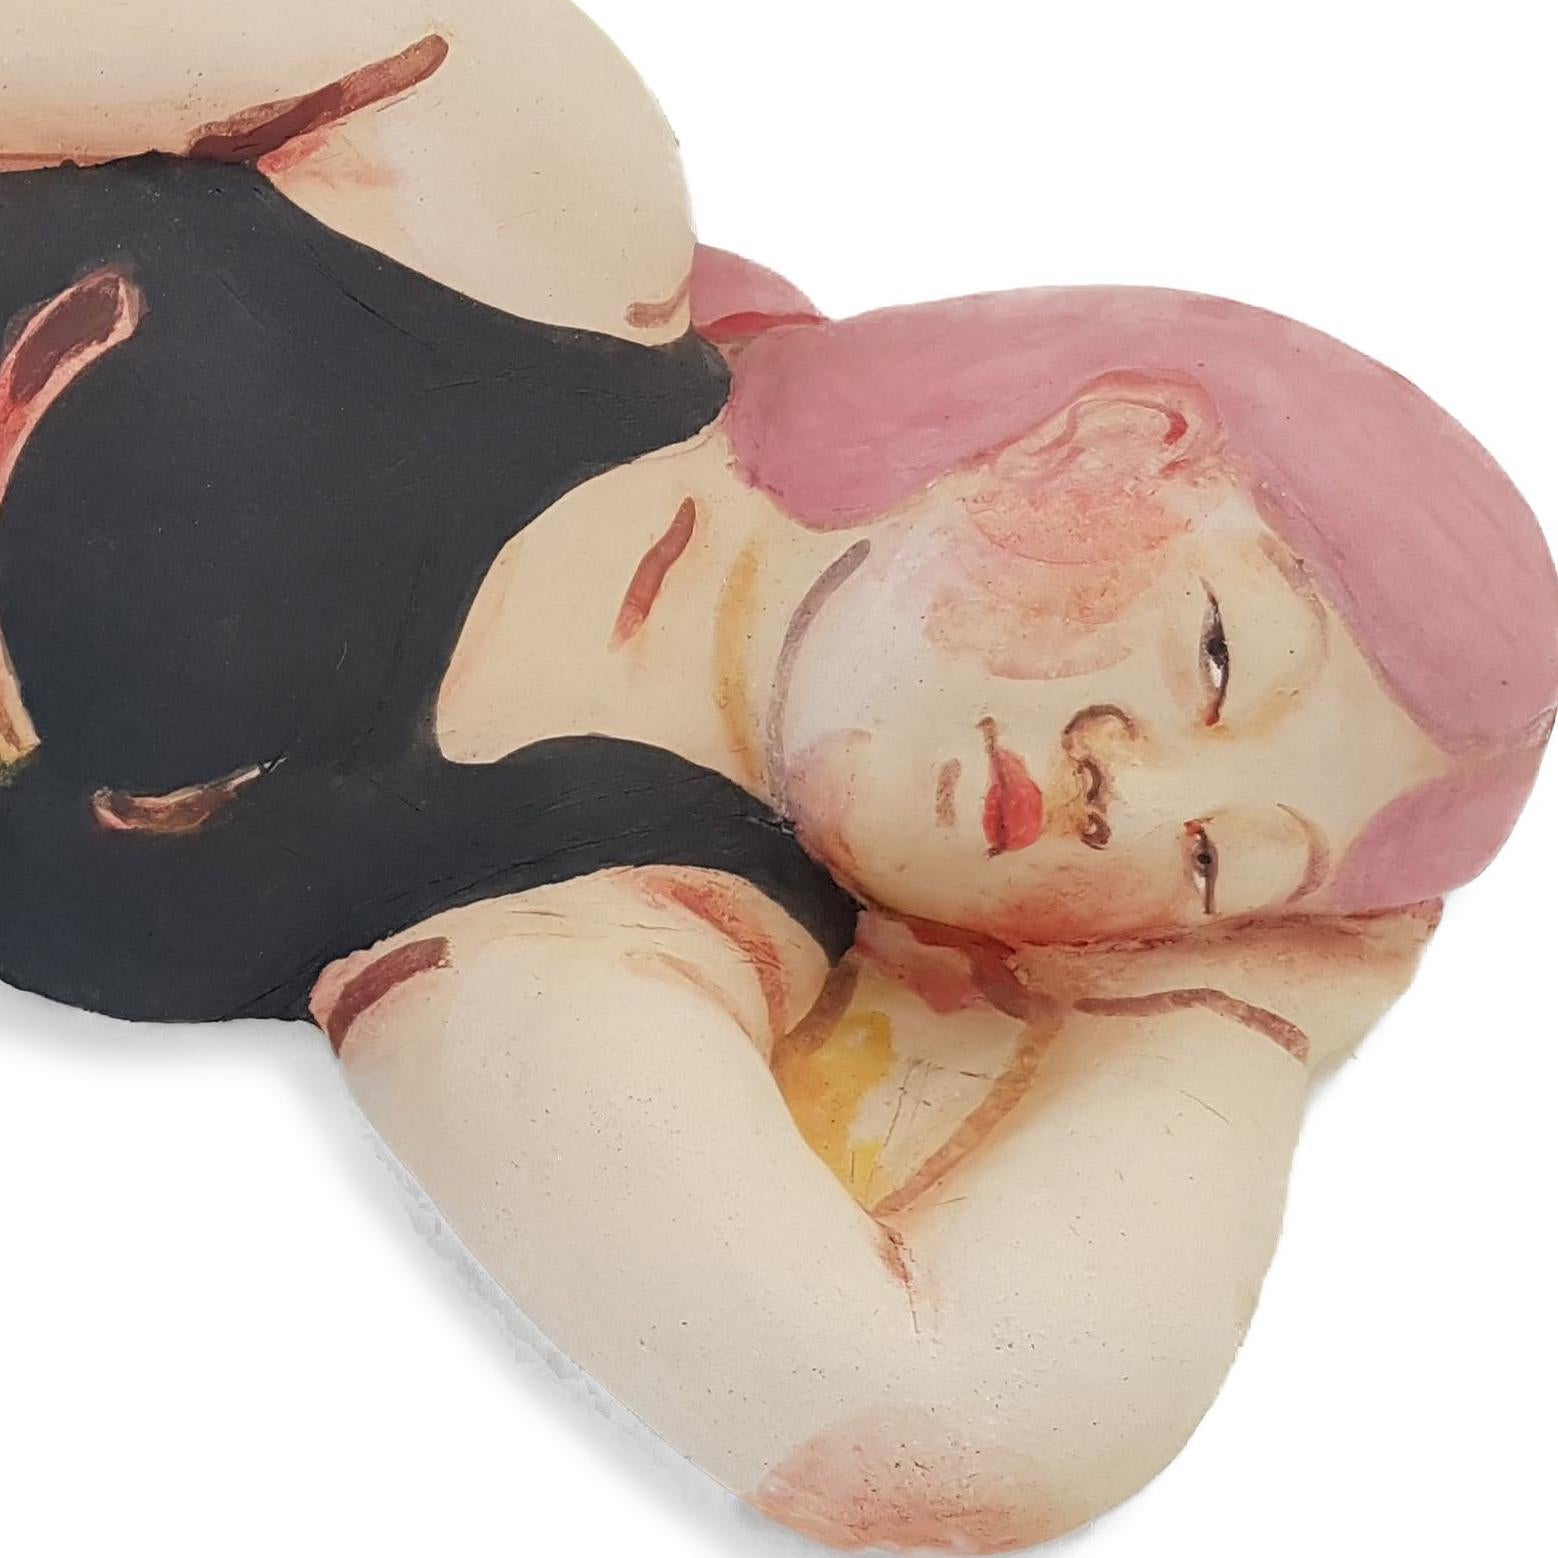 Sleeping Woman in Black Dress with Red Hair - Sculpture by Akio Takamori